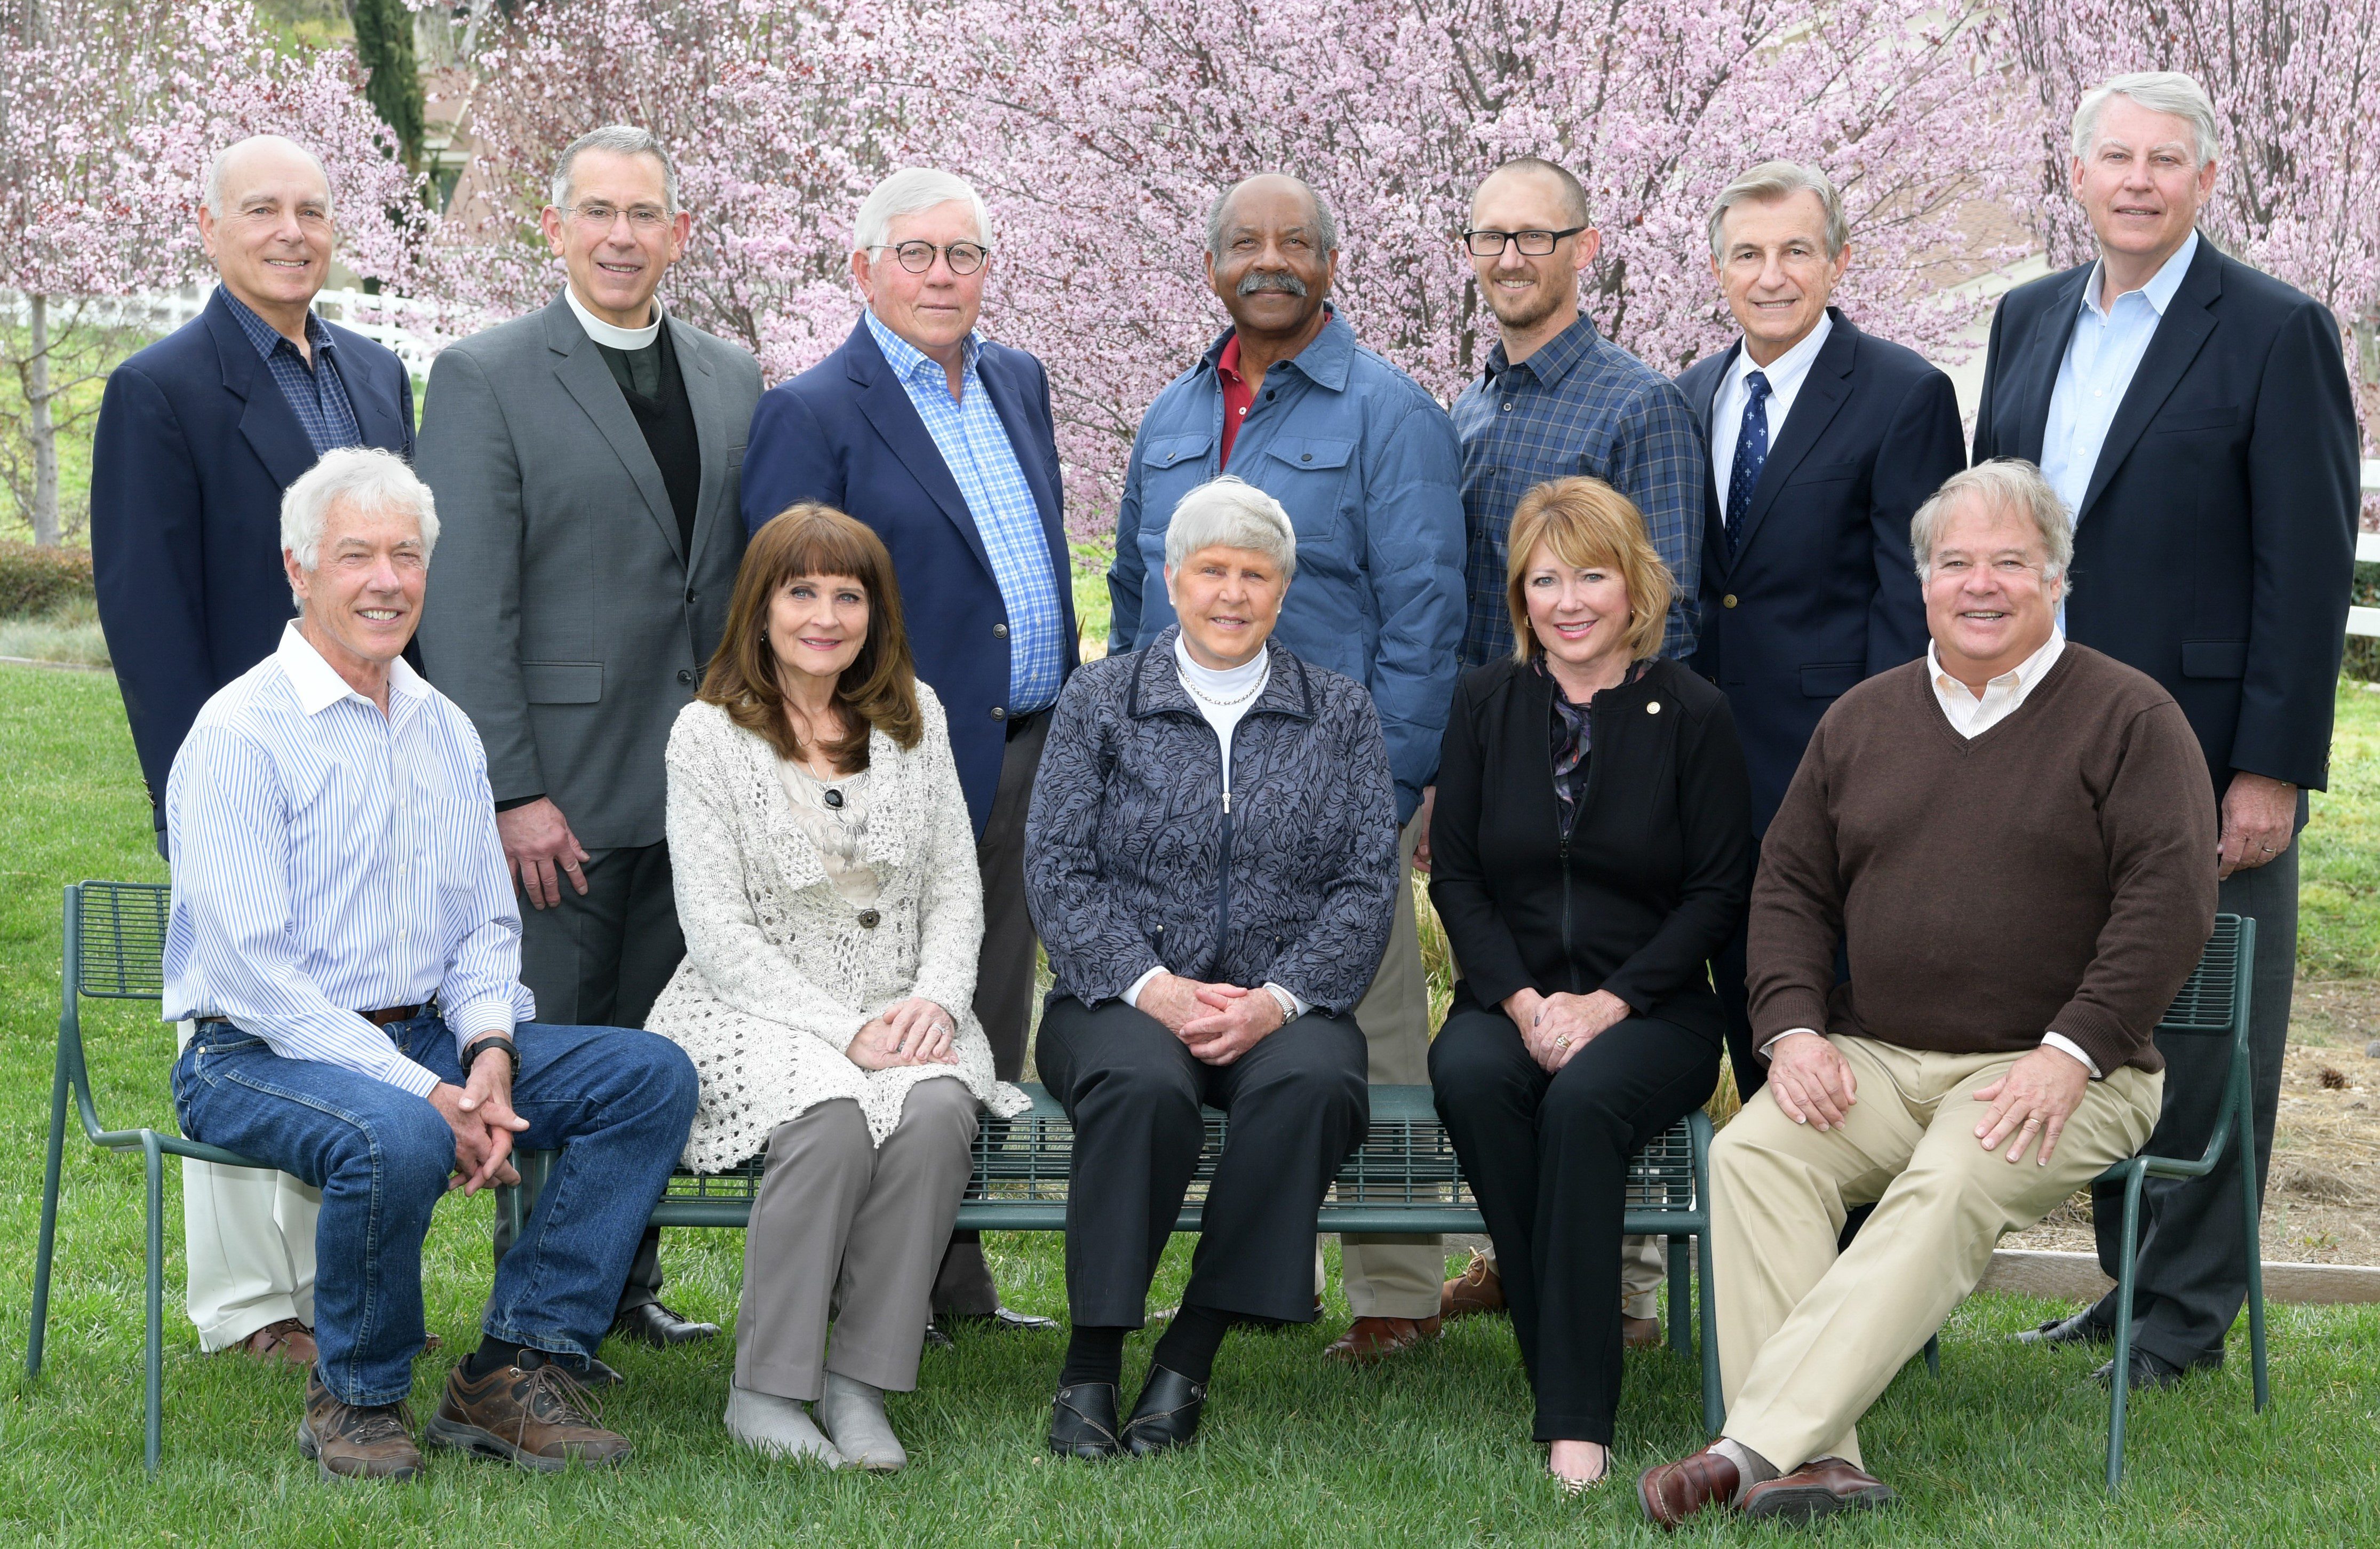 Hospital Foundation names 2019 directors and officers